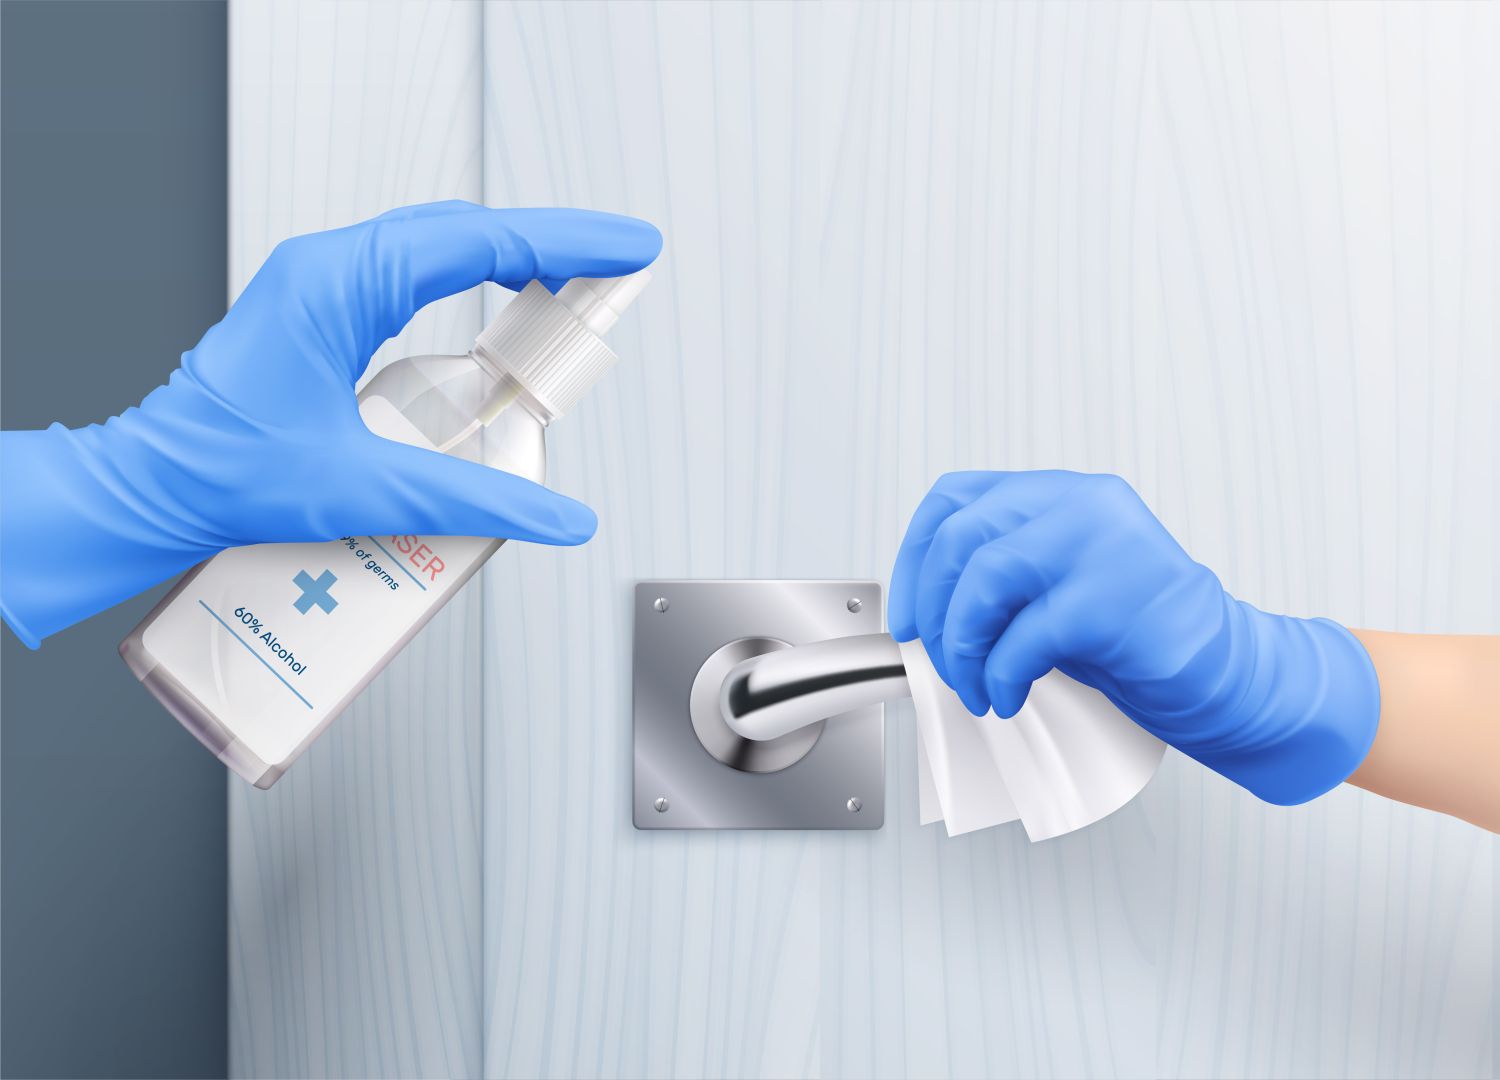 No One Tells You This About Home Sanitization